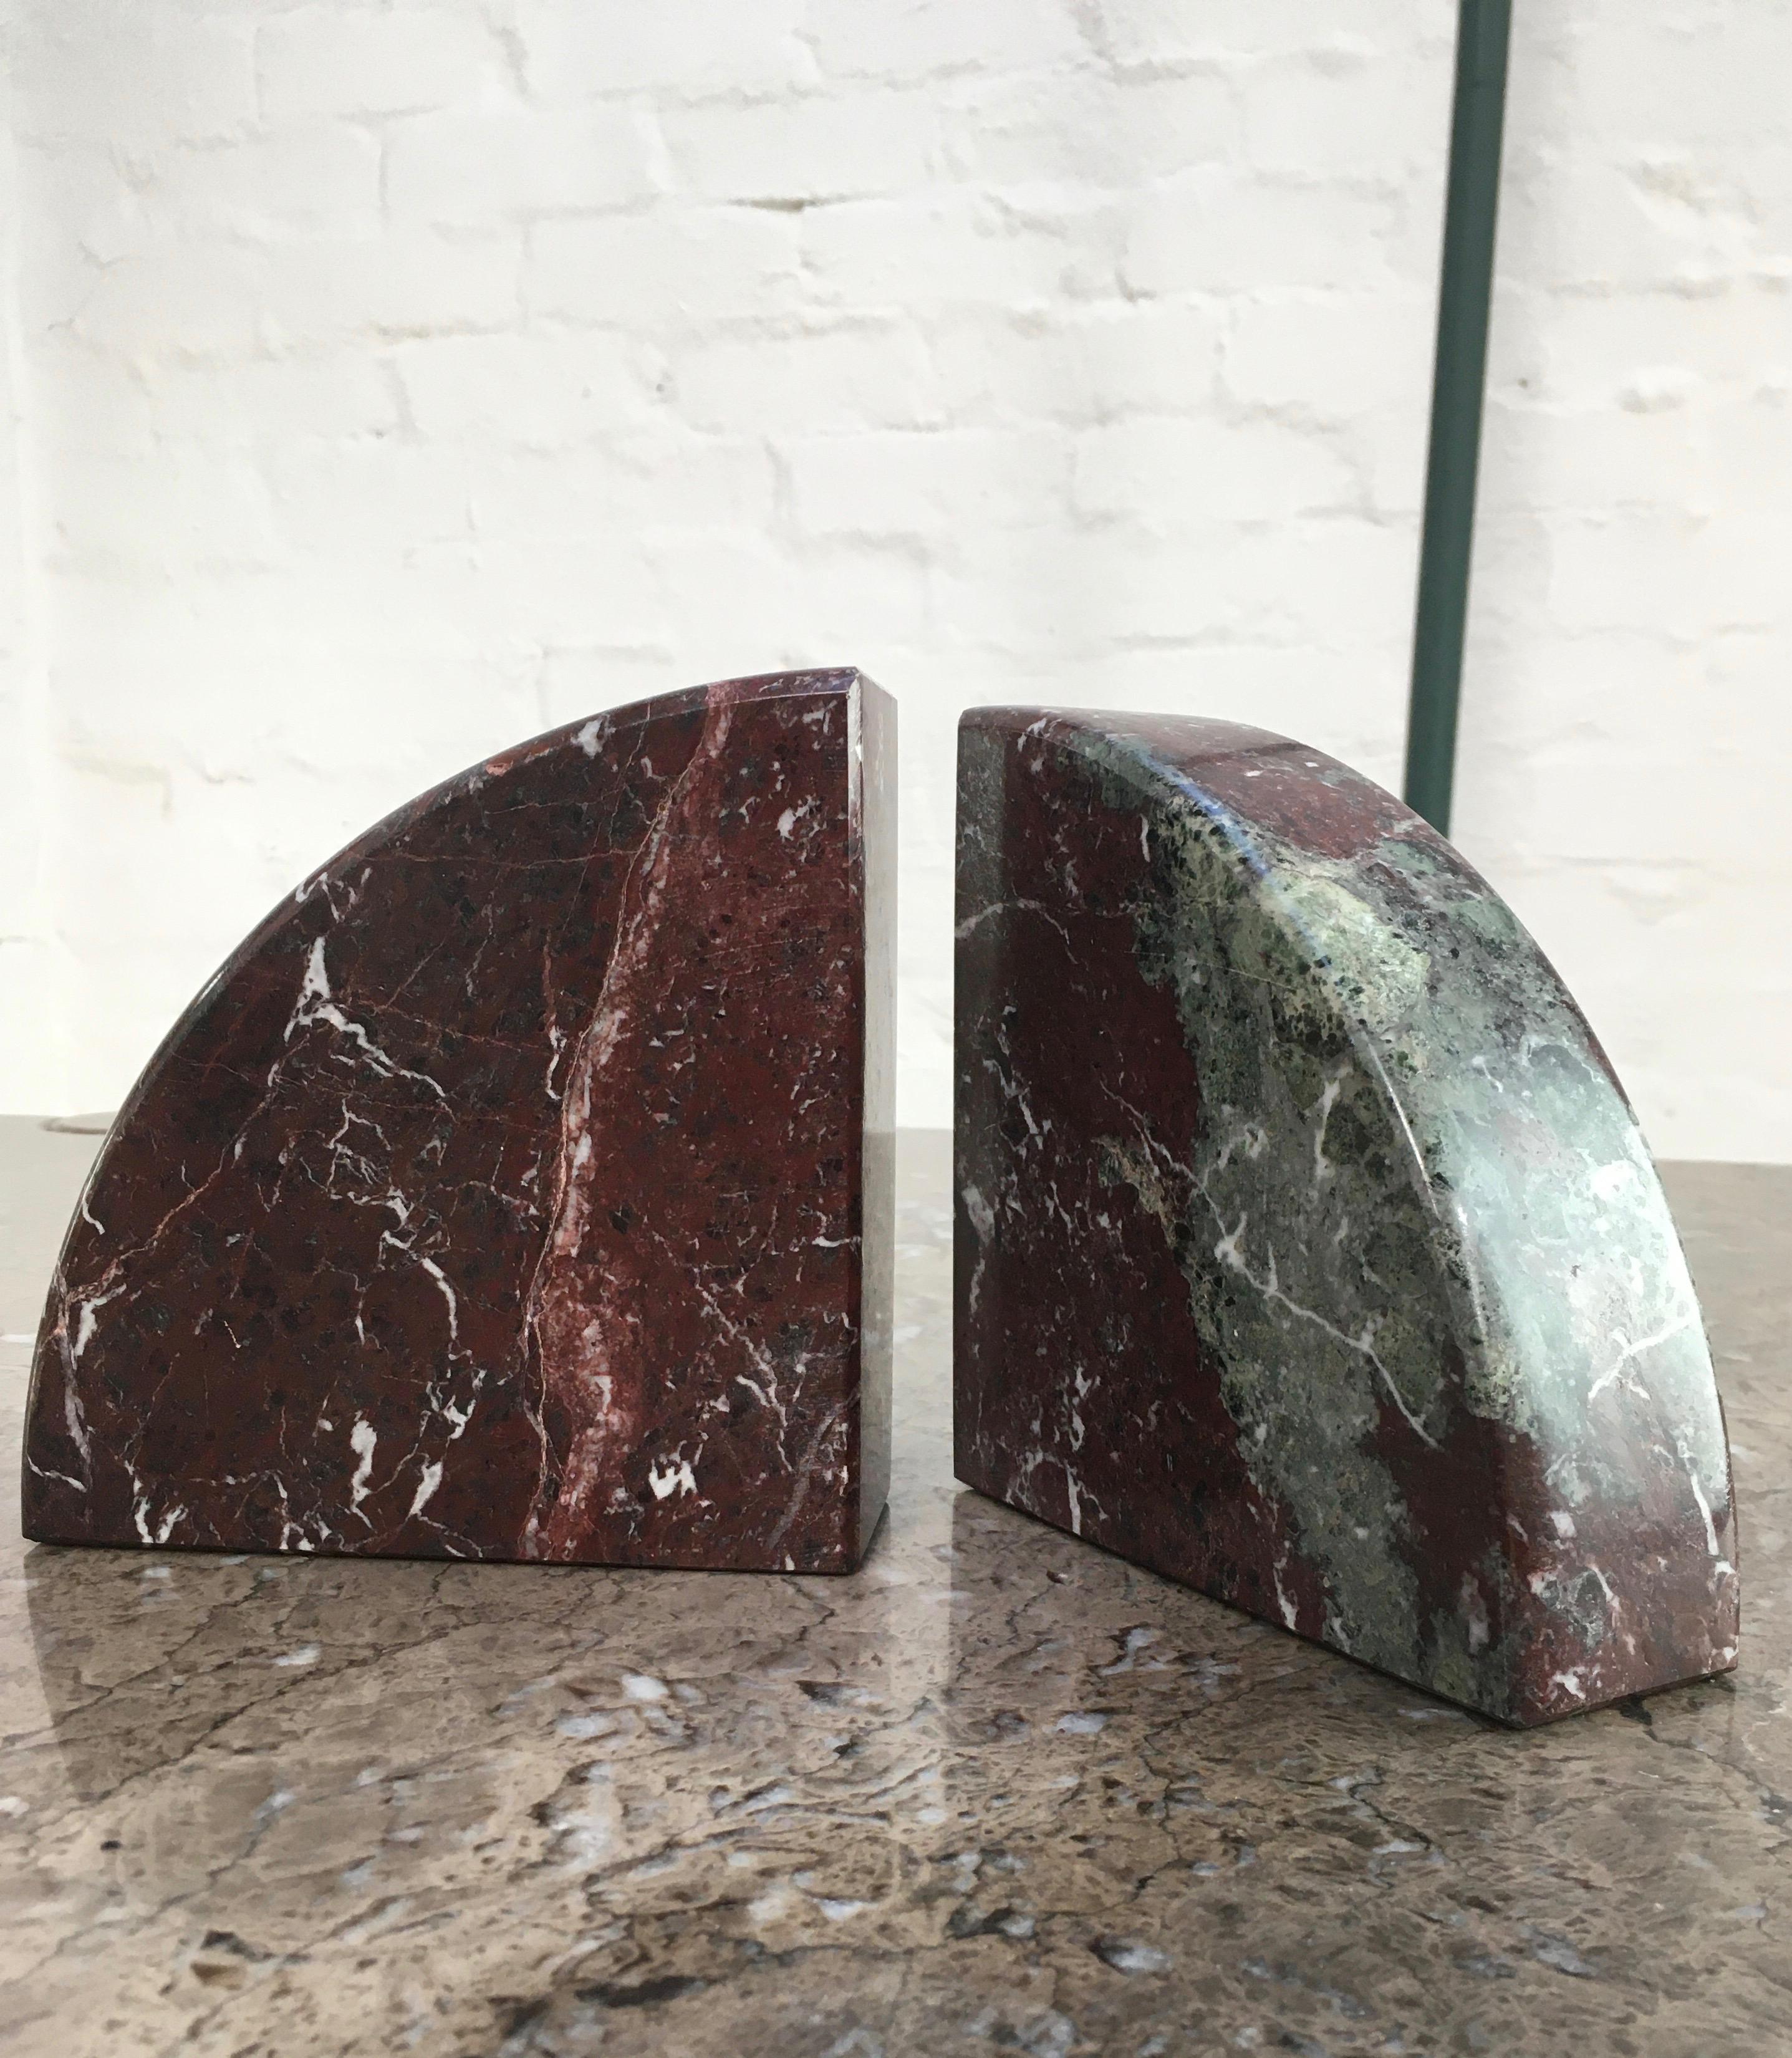 A pair of substantial bookends with great decorative appeal. These quadrant bookends can hold up a good heft of books but not too heavy to be easily handled and moved about to create the best decorative effect.

The deep reds and grey-greens in